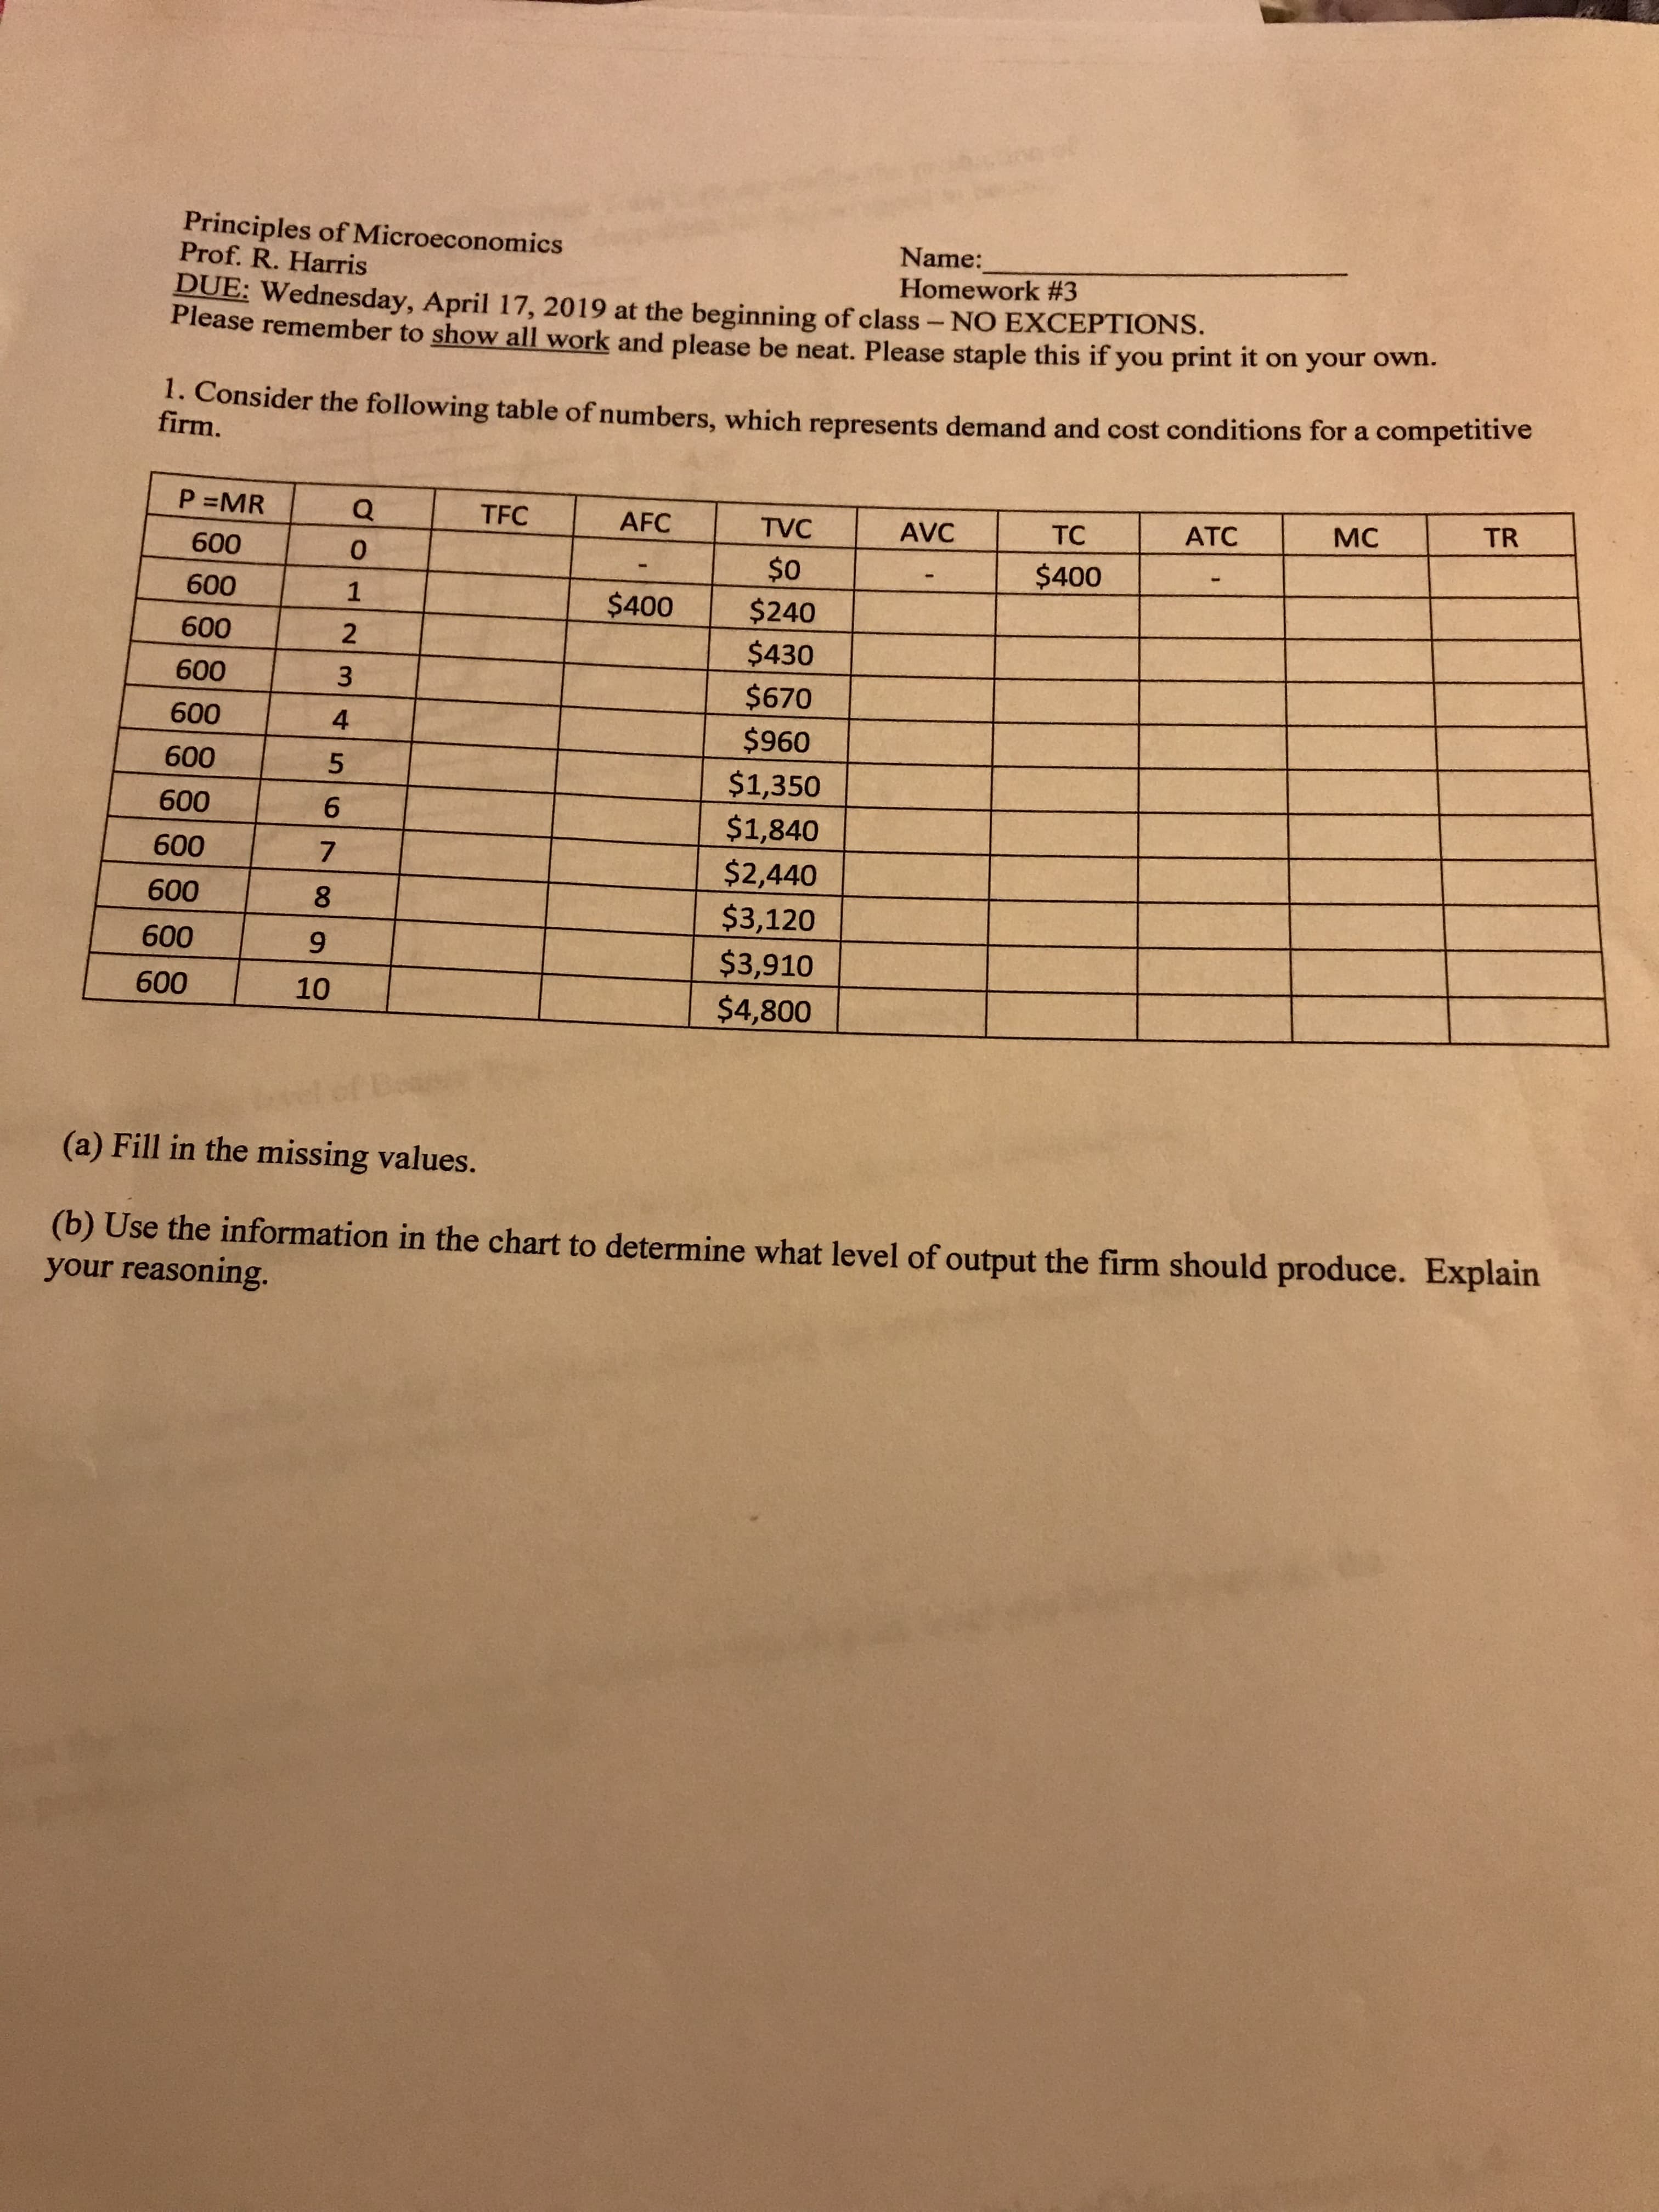 Principles of Microeconomics
Name:
Homework #3
Prof. R. Harris
DUE: Wednesday, April 17, 2019 at the beginning of class - NO EXCEPTIONS.
Please remember to show all work and please be neat. Please staple this if you print it on your own.
1. Consider the following table of numbers, which represents demand and cost conditions for a com
firm.
petitive
TR
600
0
1
2
$o
$400
600
$400 $240
600
$430
$670
$960
$1,350
$1,840
$2,440
$3,120
$3,910
$4,800
600
600
600
600
600
600
5
6
7
600
600
9
10
(a) Fill in the missing values
(b) Use the information in the chart to determine what level of output the firm should produce. Explain
your reasoning.
